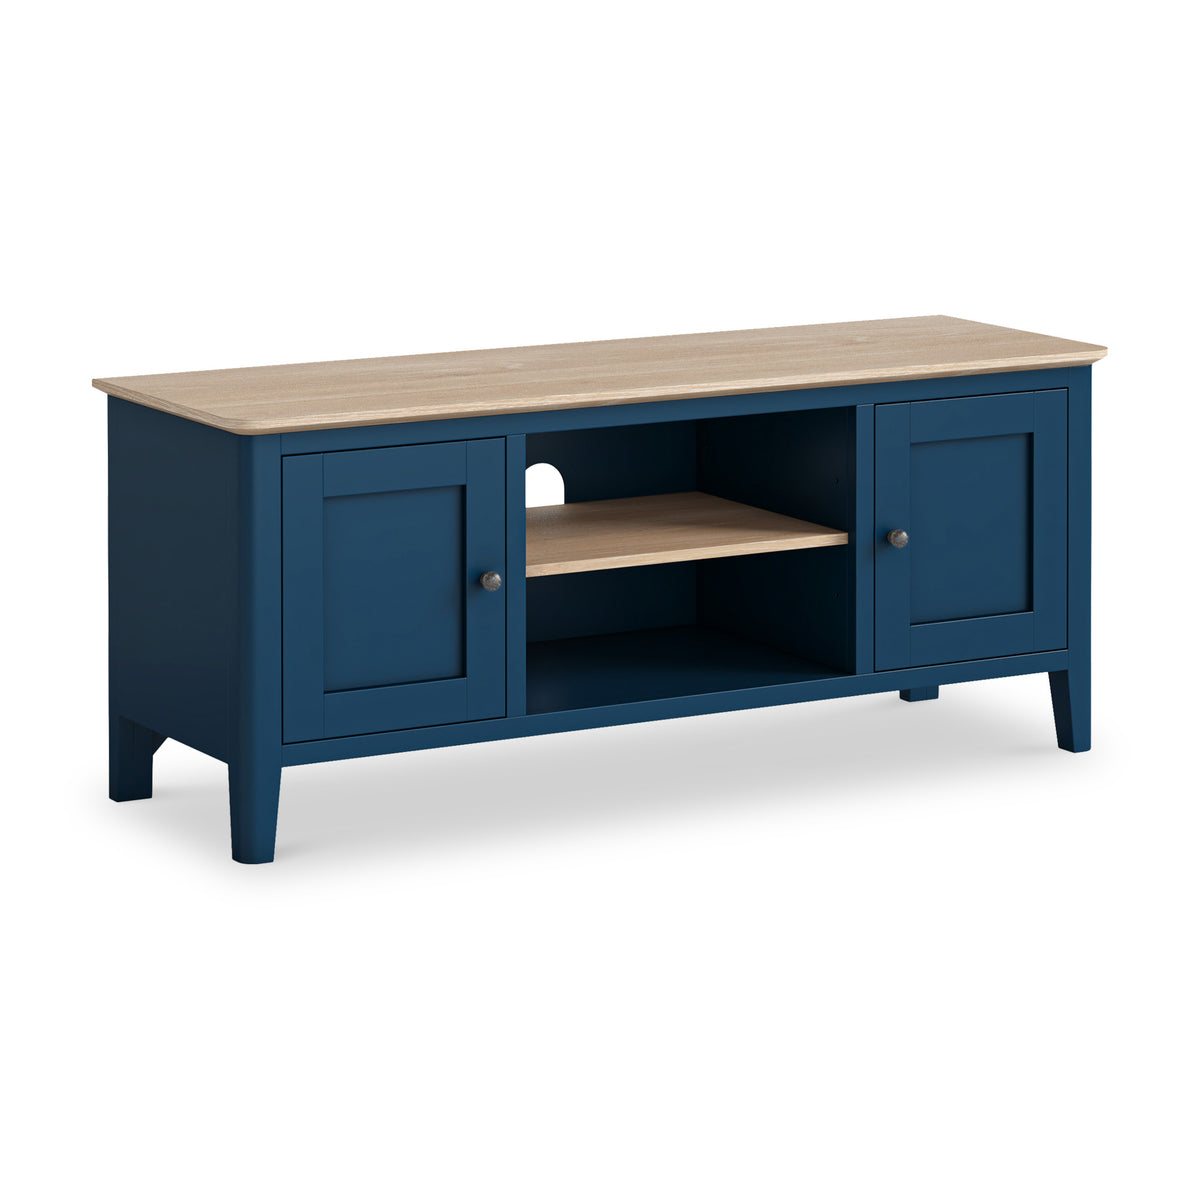 Penrose Navy 150cm TV Unit with metal handles from Roseland Furniture